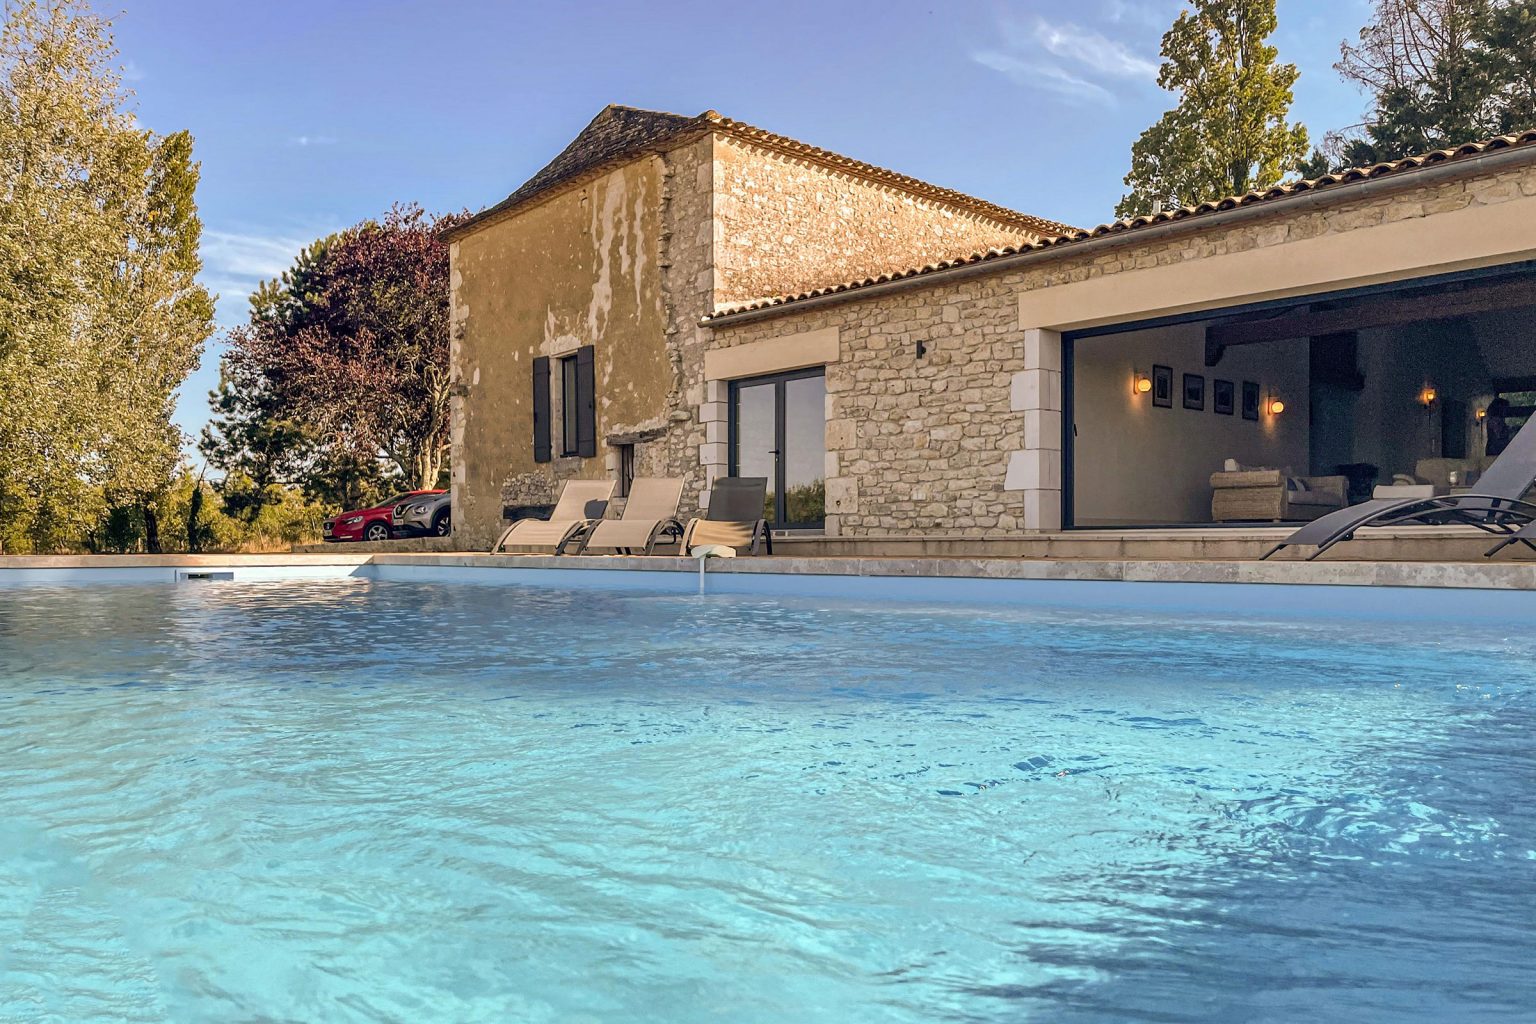 La Bique holiday villa with a private heated saltwater pool in St Sernin near Duras. Bordeaux, Bergerac SW France